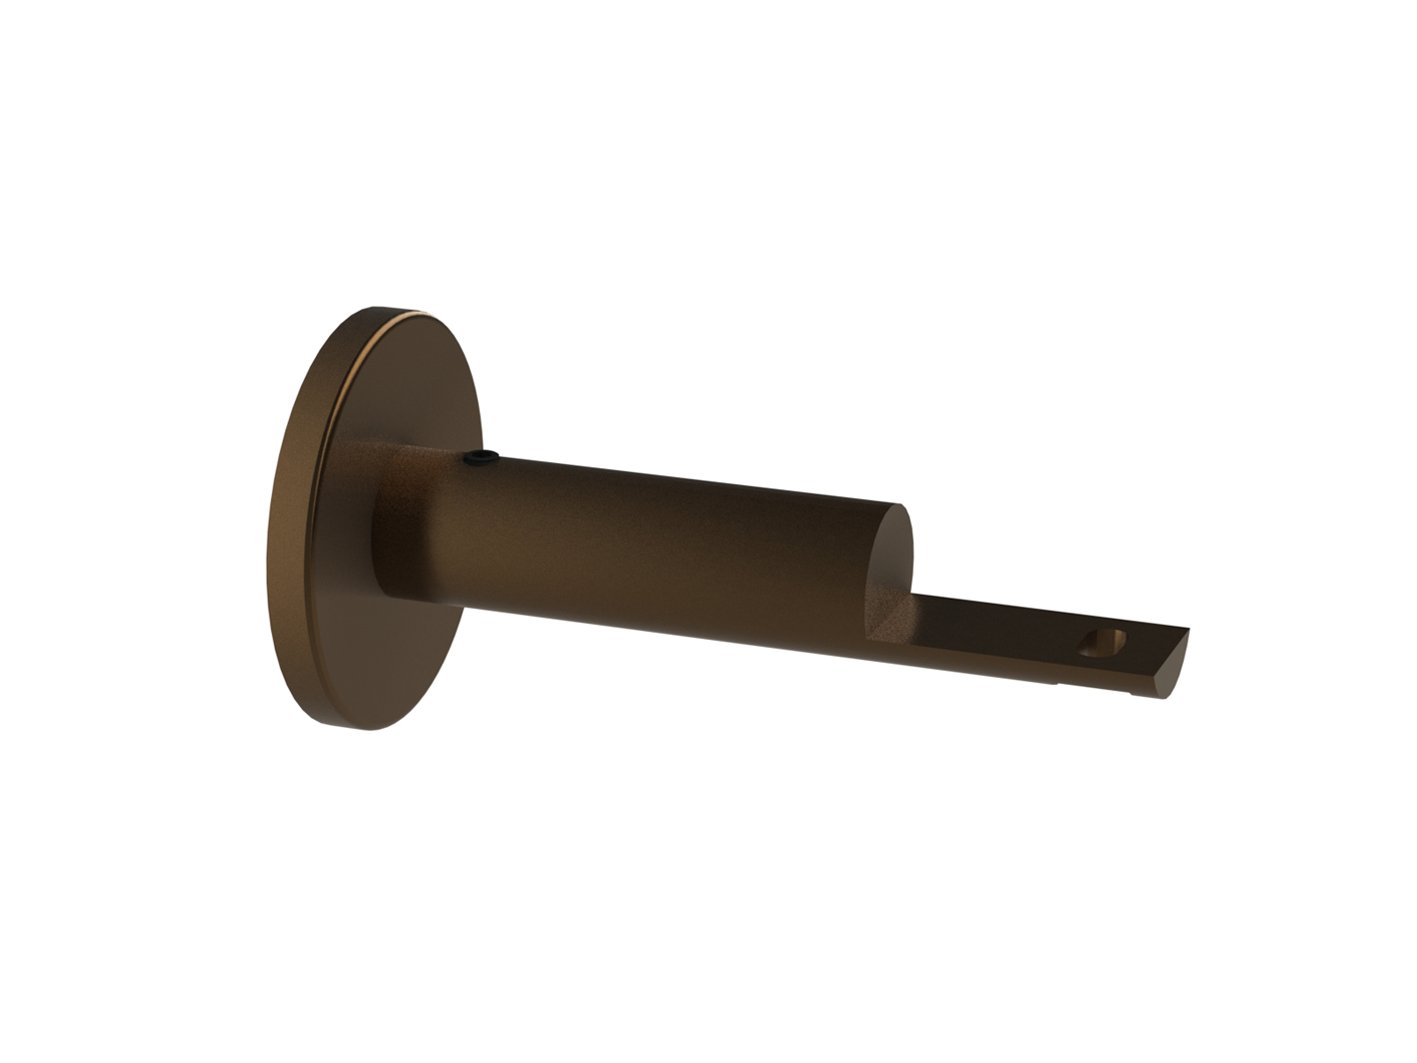 Brushed bronze passing bracket for 19mm curtain poles by Walcot House